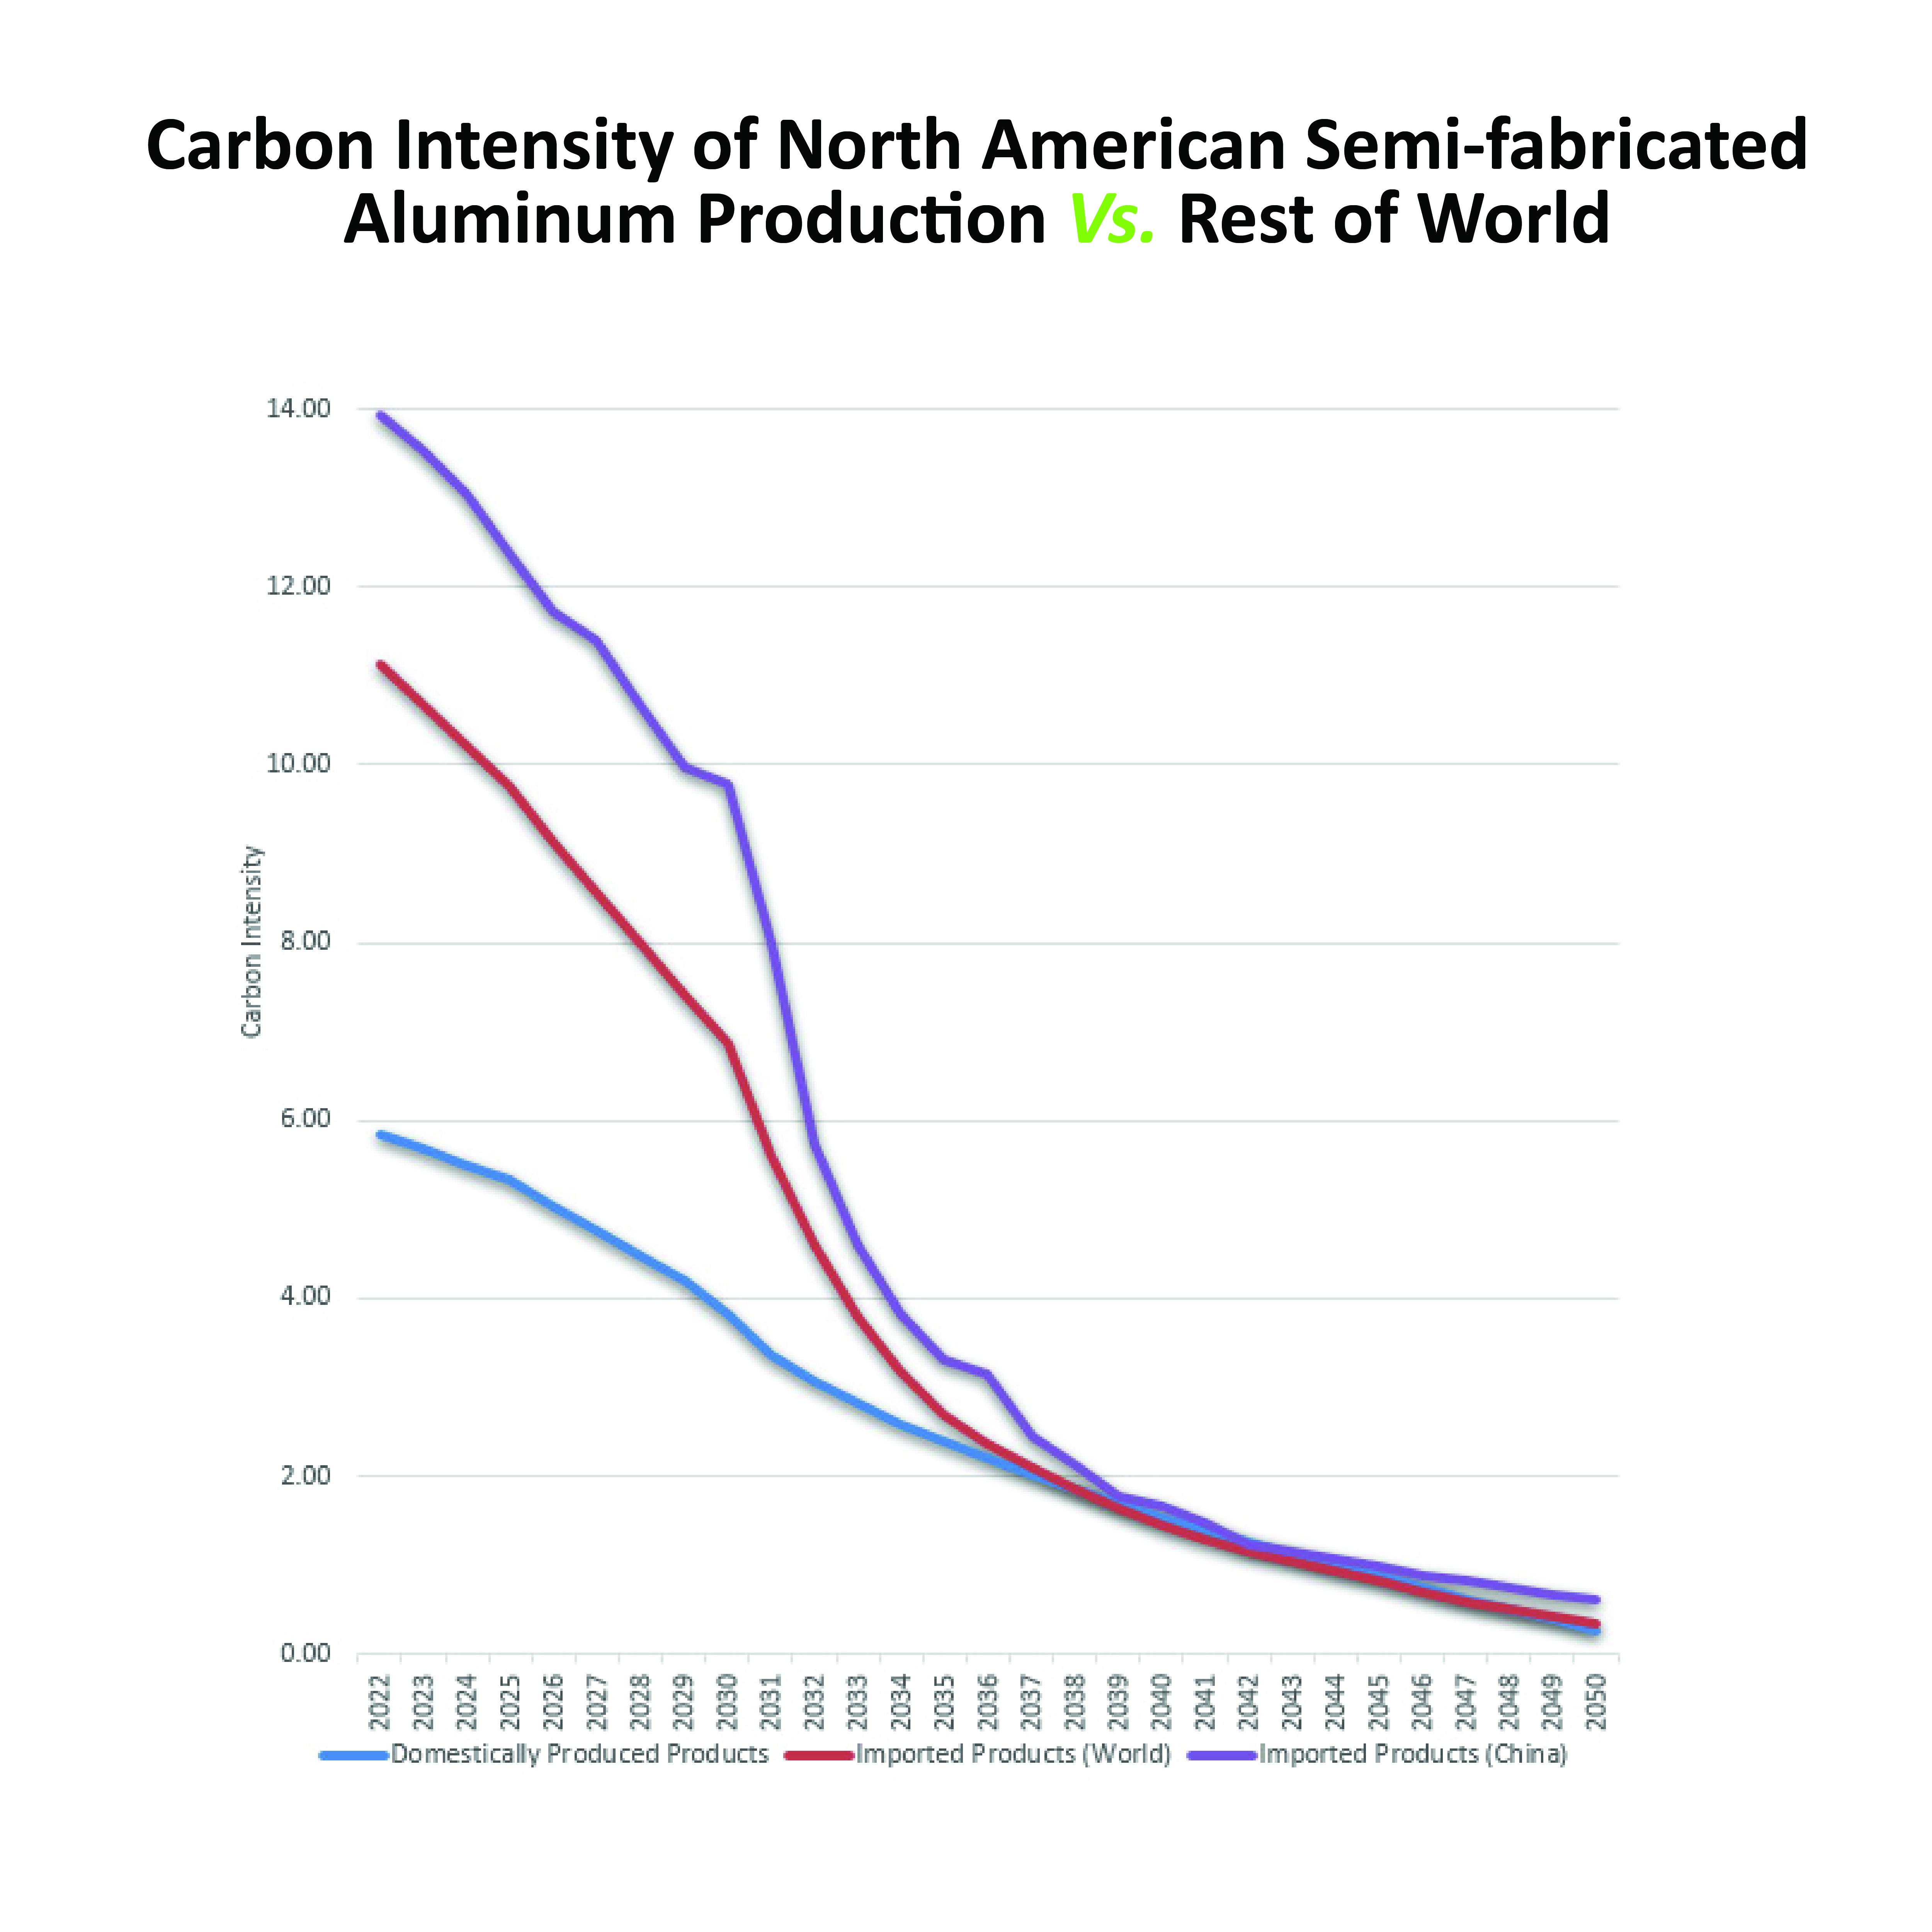 Chart showing carbon intensity of North American semi-fabricated aluminum productions vs rest of the world